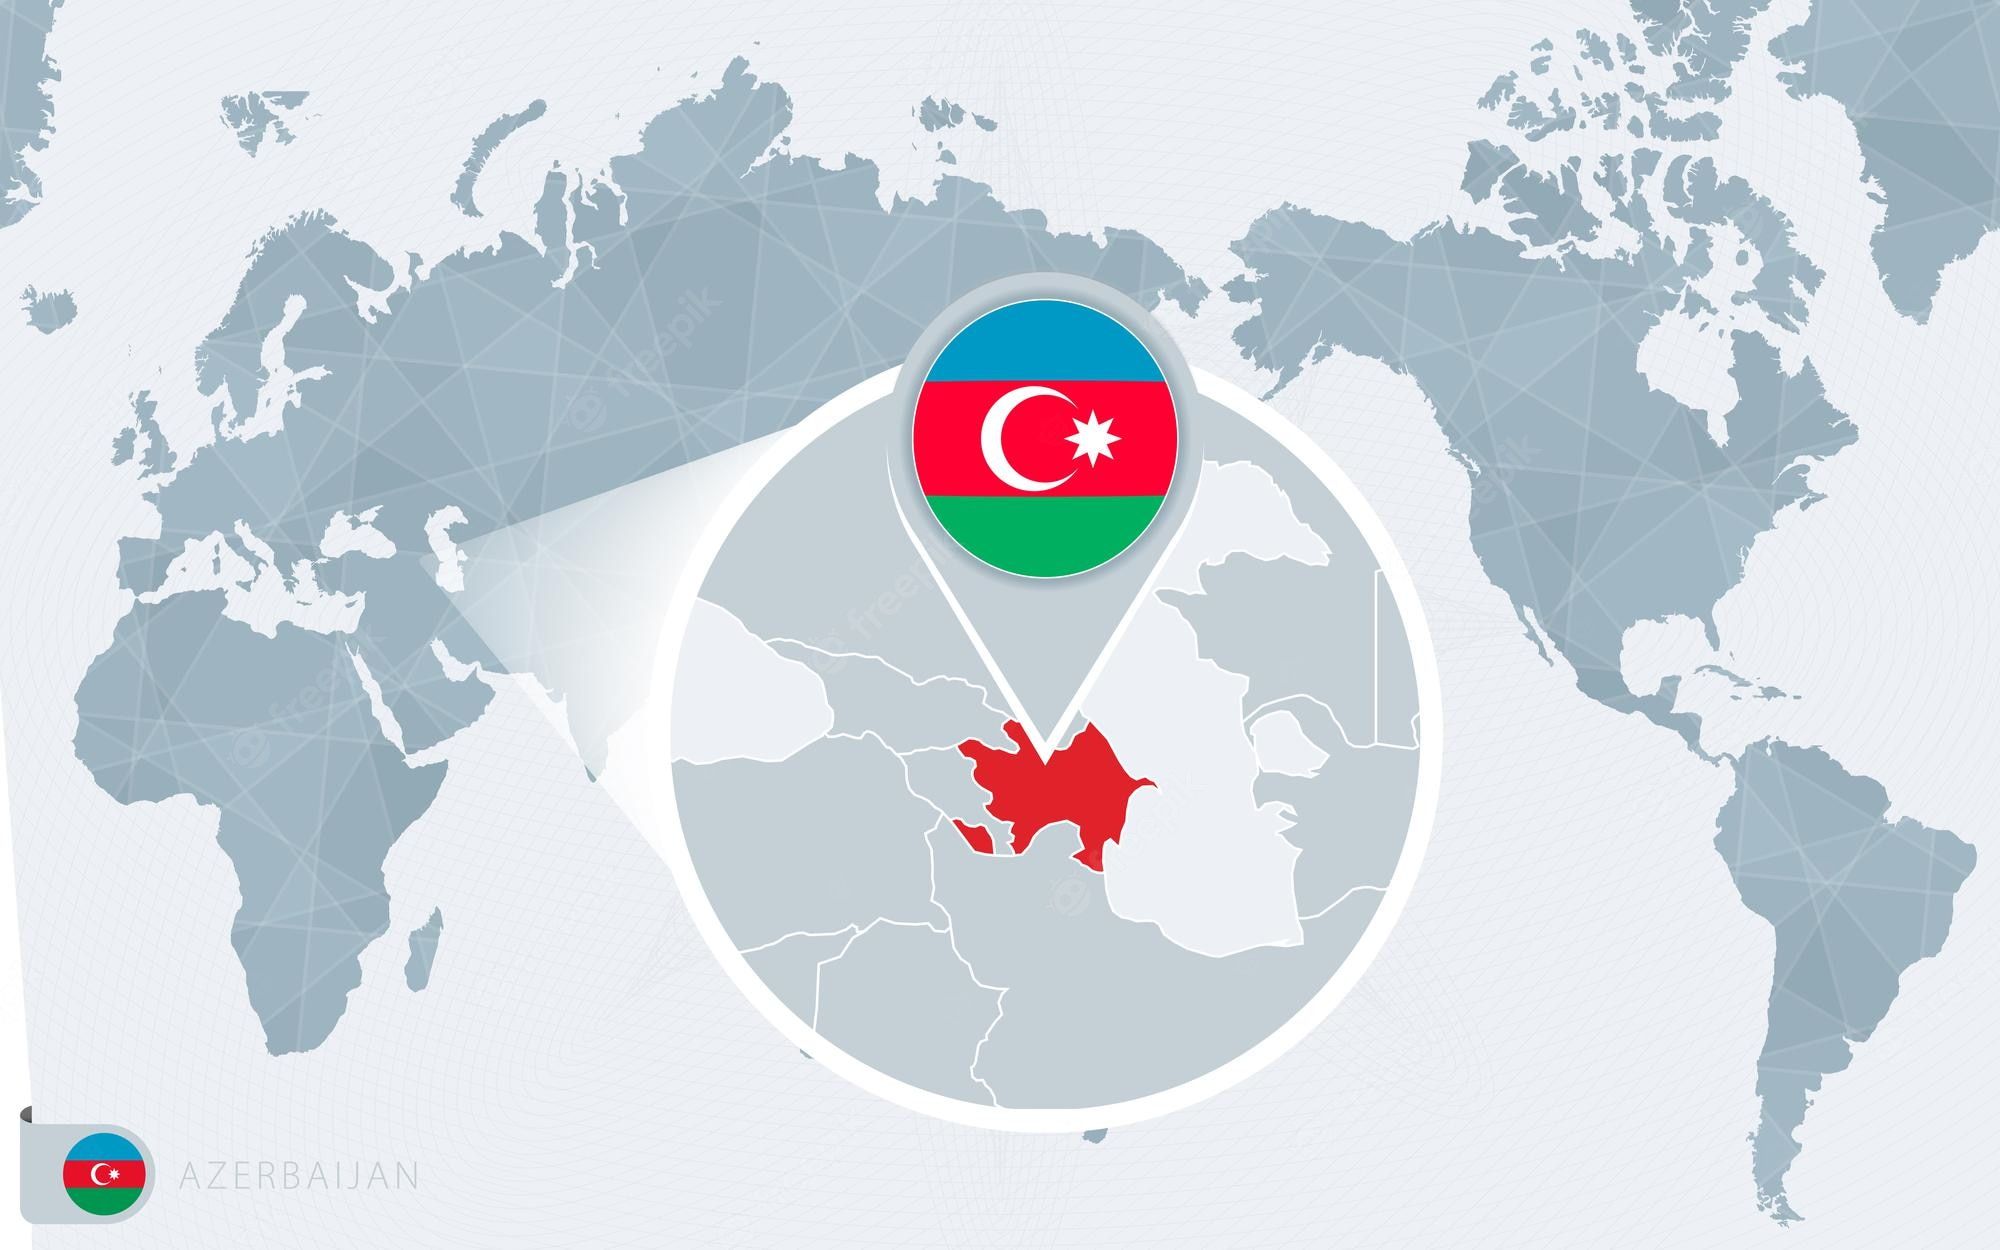 STATEMENT of the World Azerbaijanis addressed to the international community regarding the sabotage attacks committed by the Armenian Army on September 12, 2022